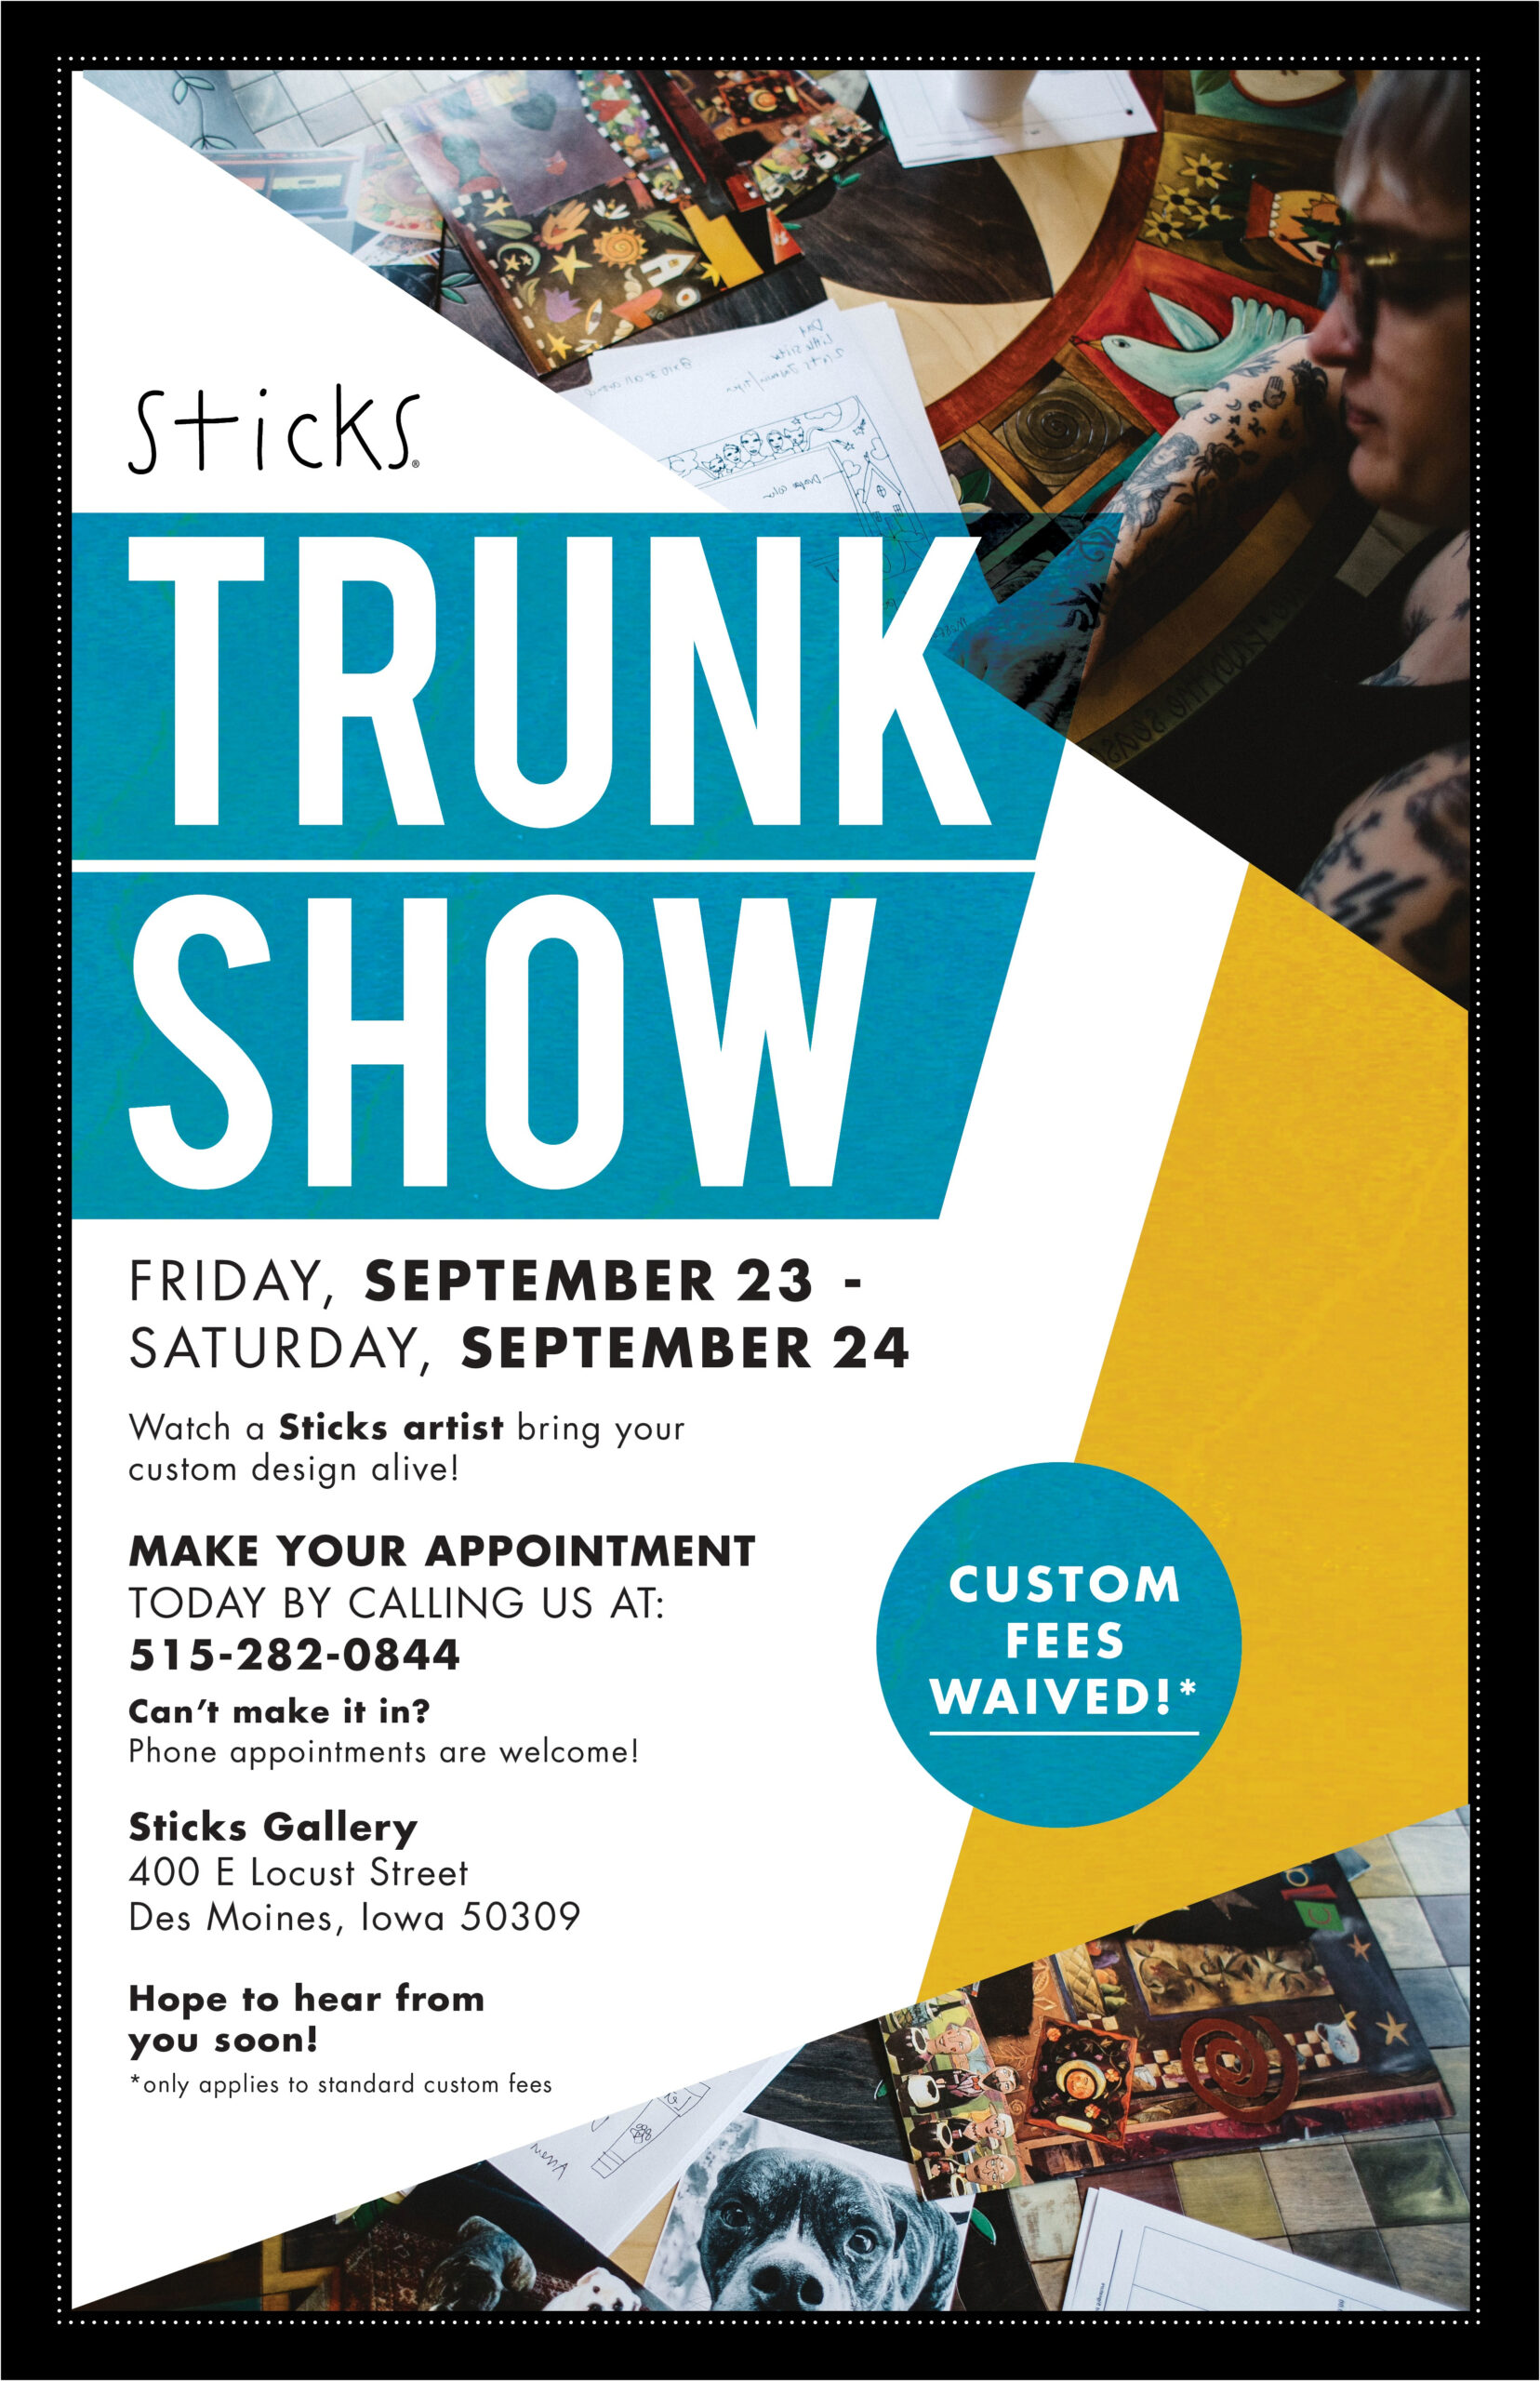 Sticks Fall Trunk Show – September 10rd and 10th – Sticks Gallery Throughout Trunk Show Flyer Template With Trunk Show Flyer Template